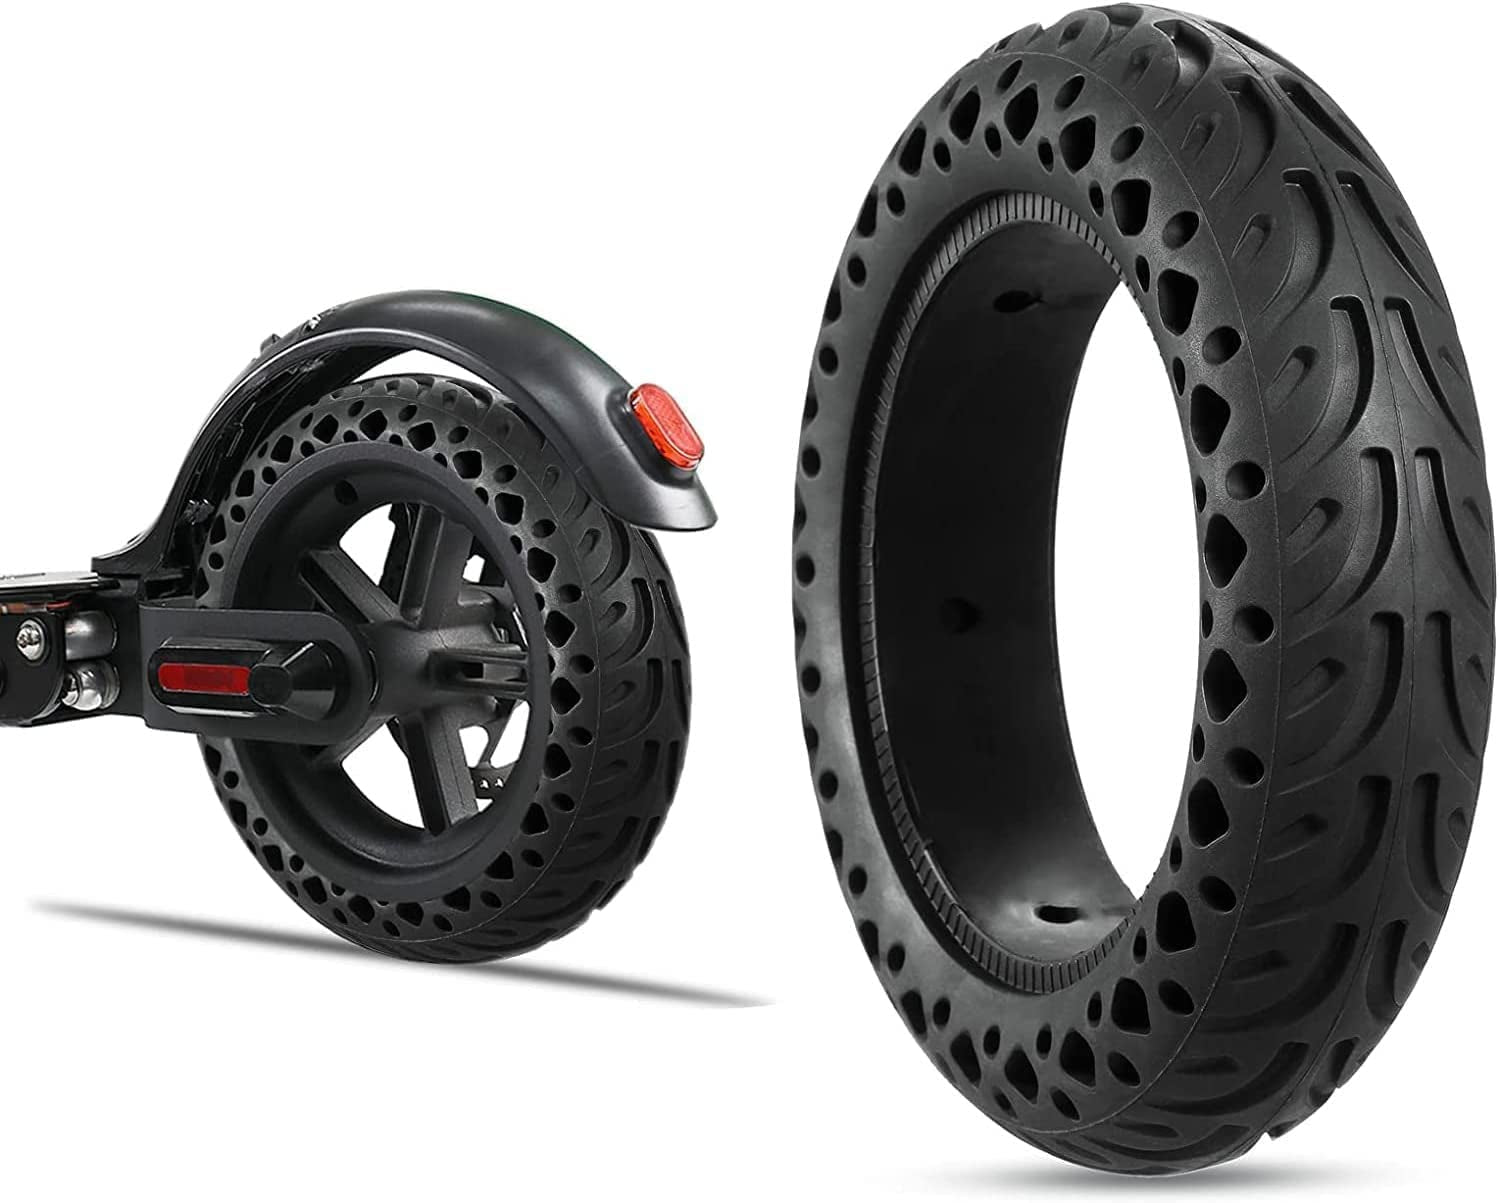 10x2.0 Solid Tire 10 Inch Hilop Electric Scooter Tire Honeycomb